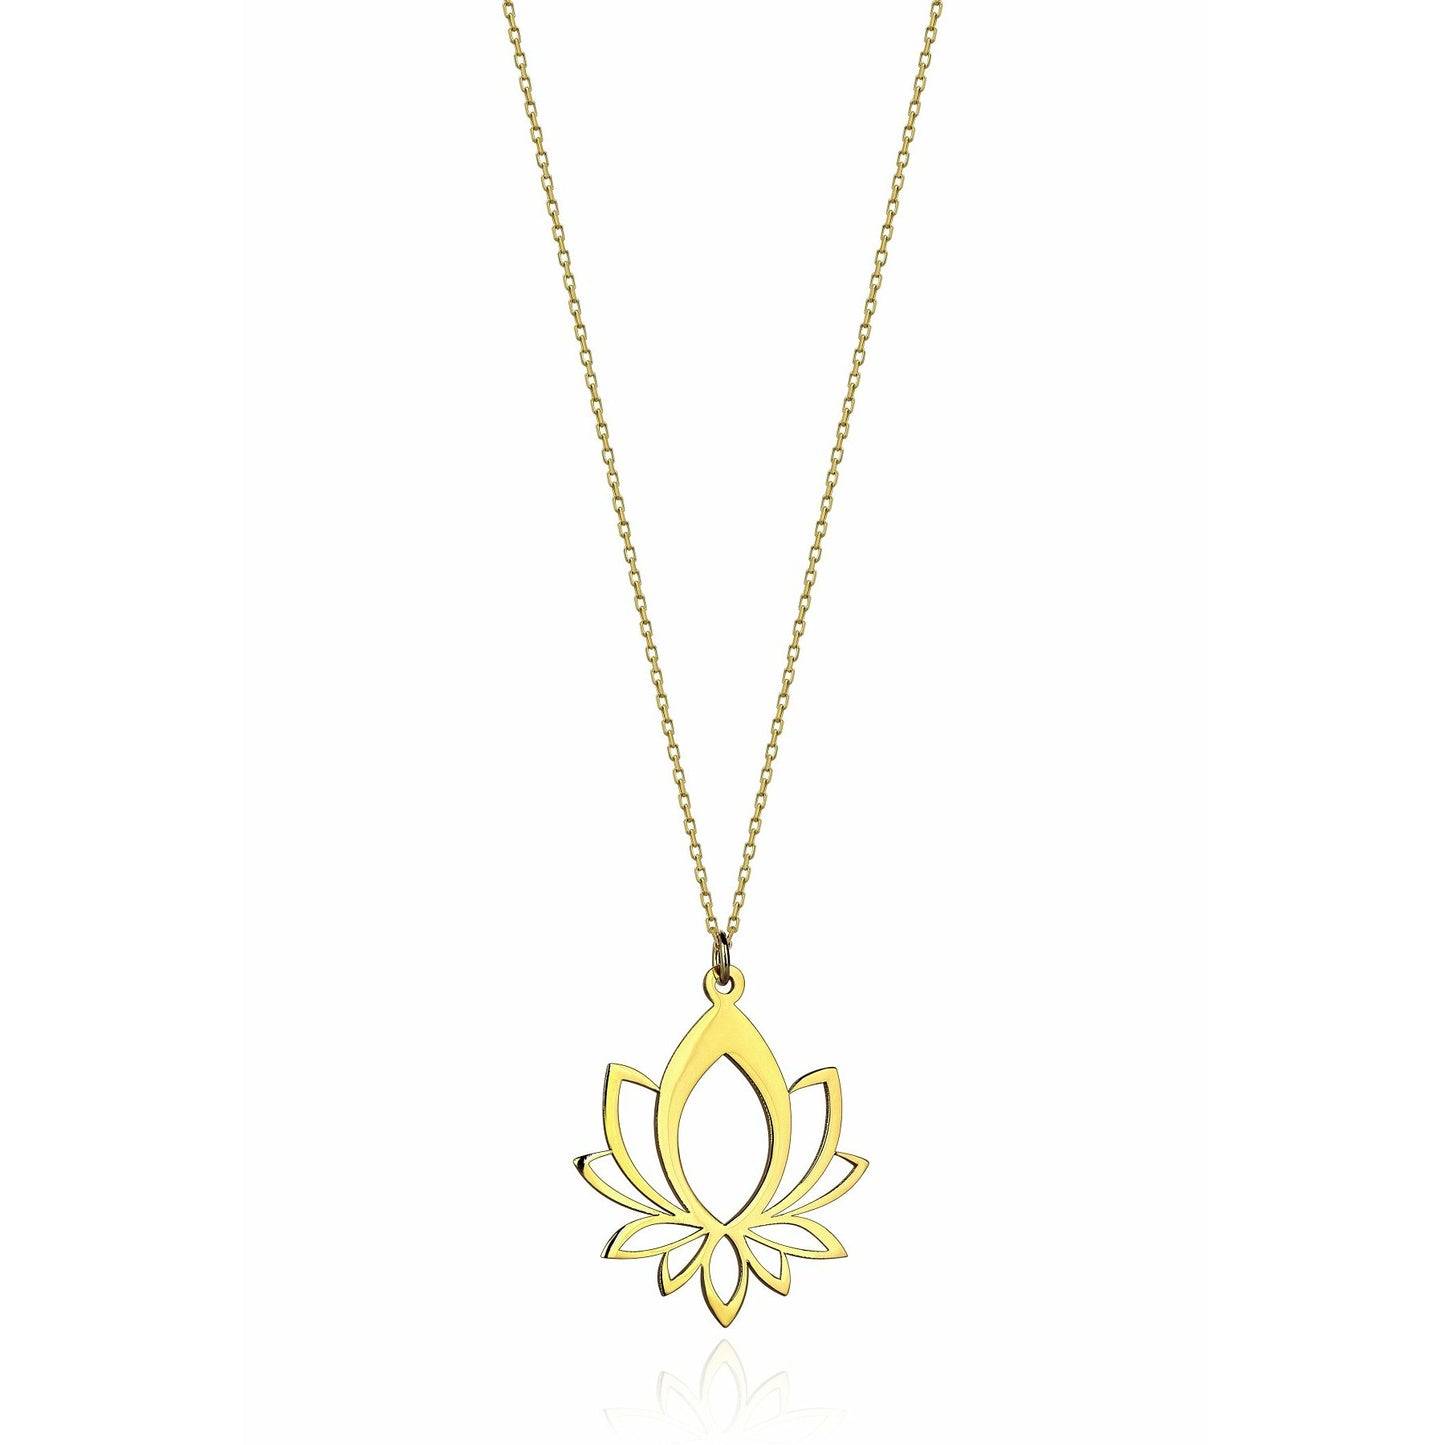 Special Design Gift 14k Gold Lotus Necklace 